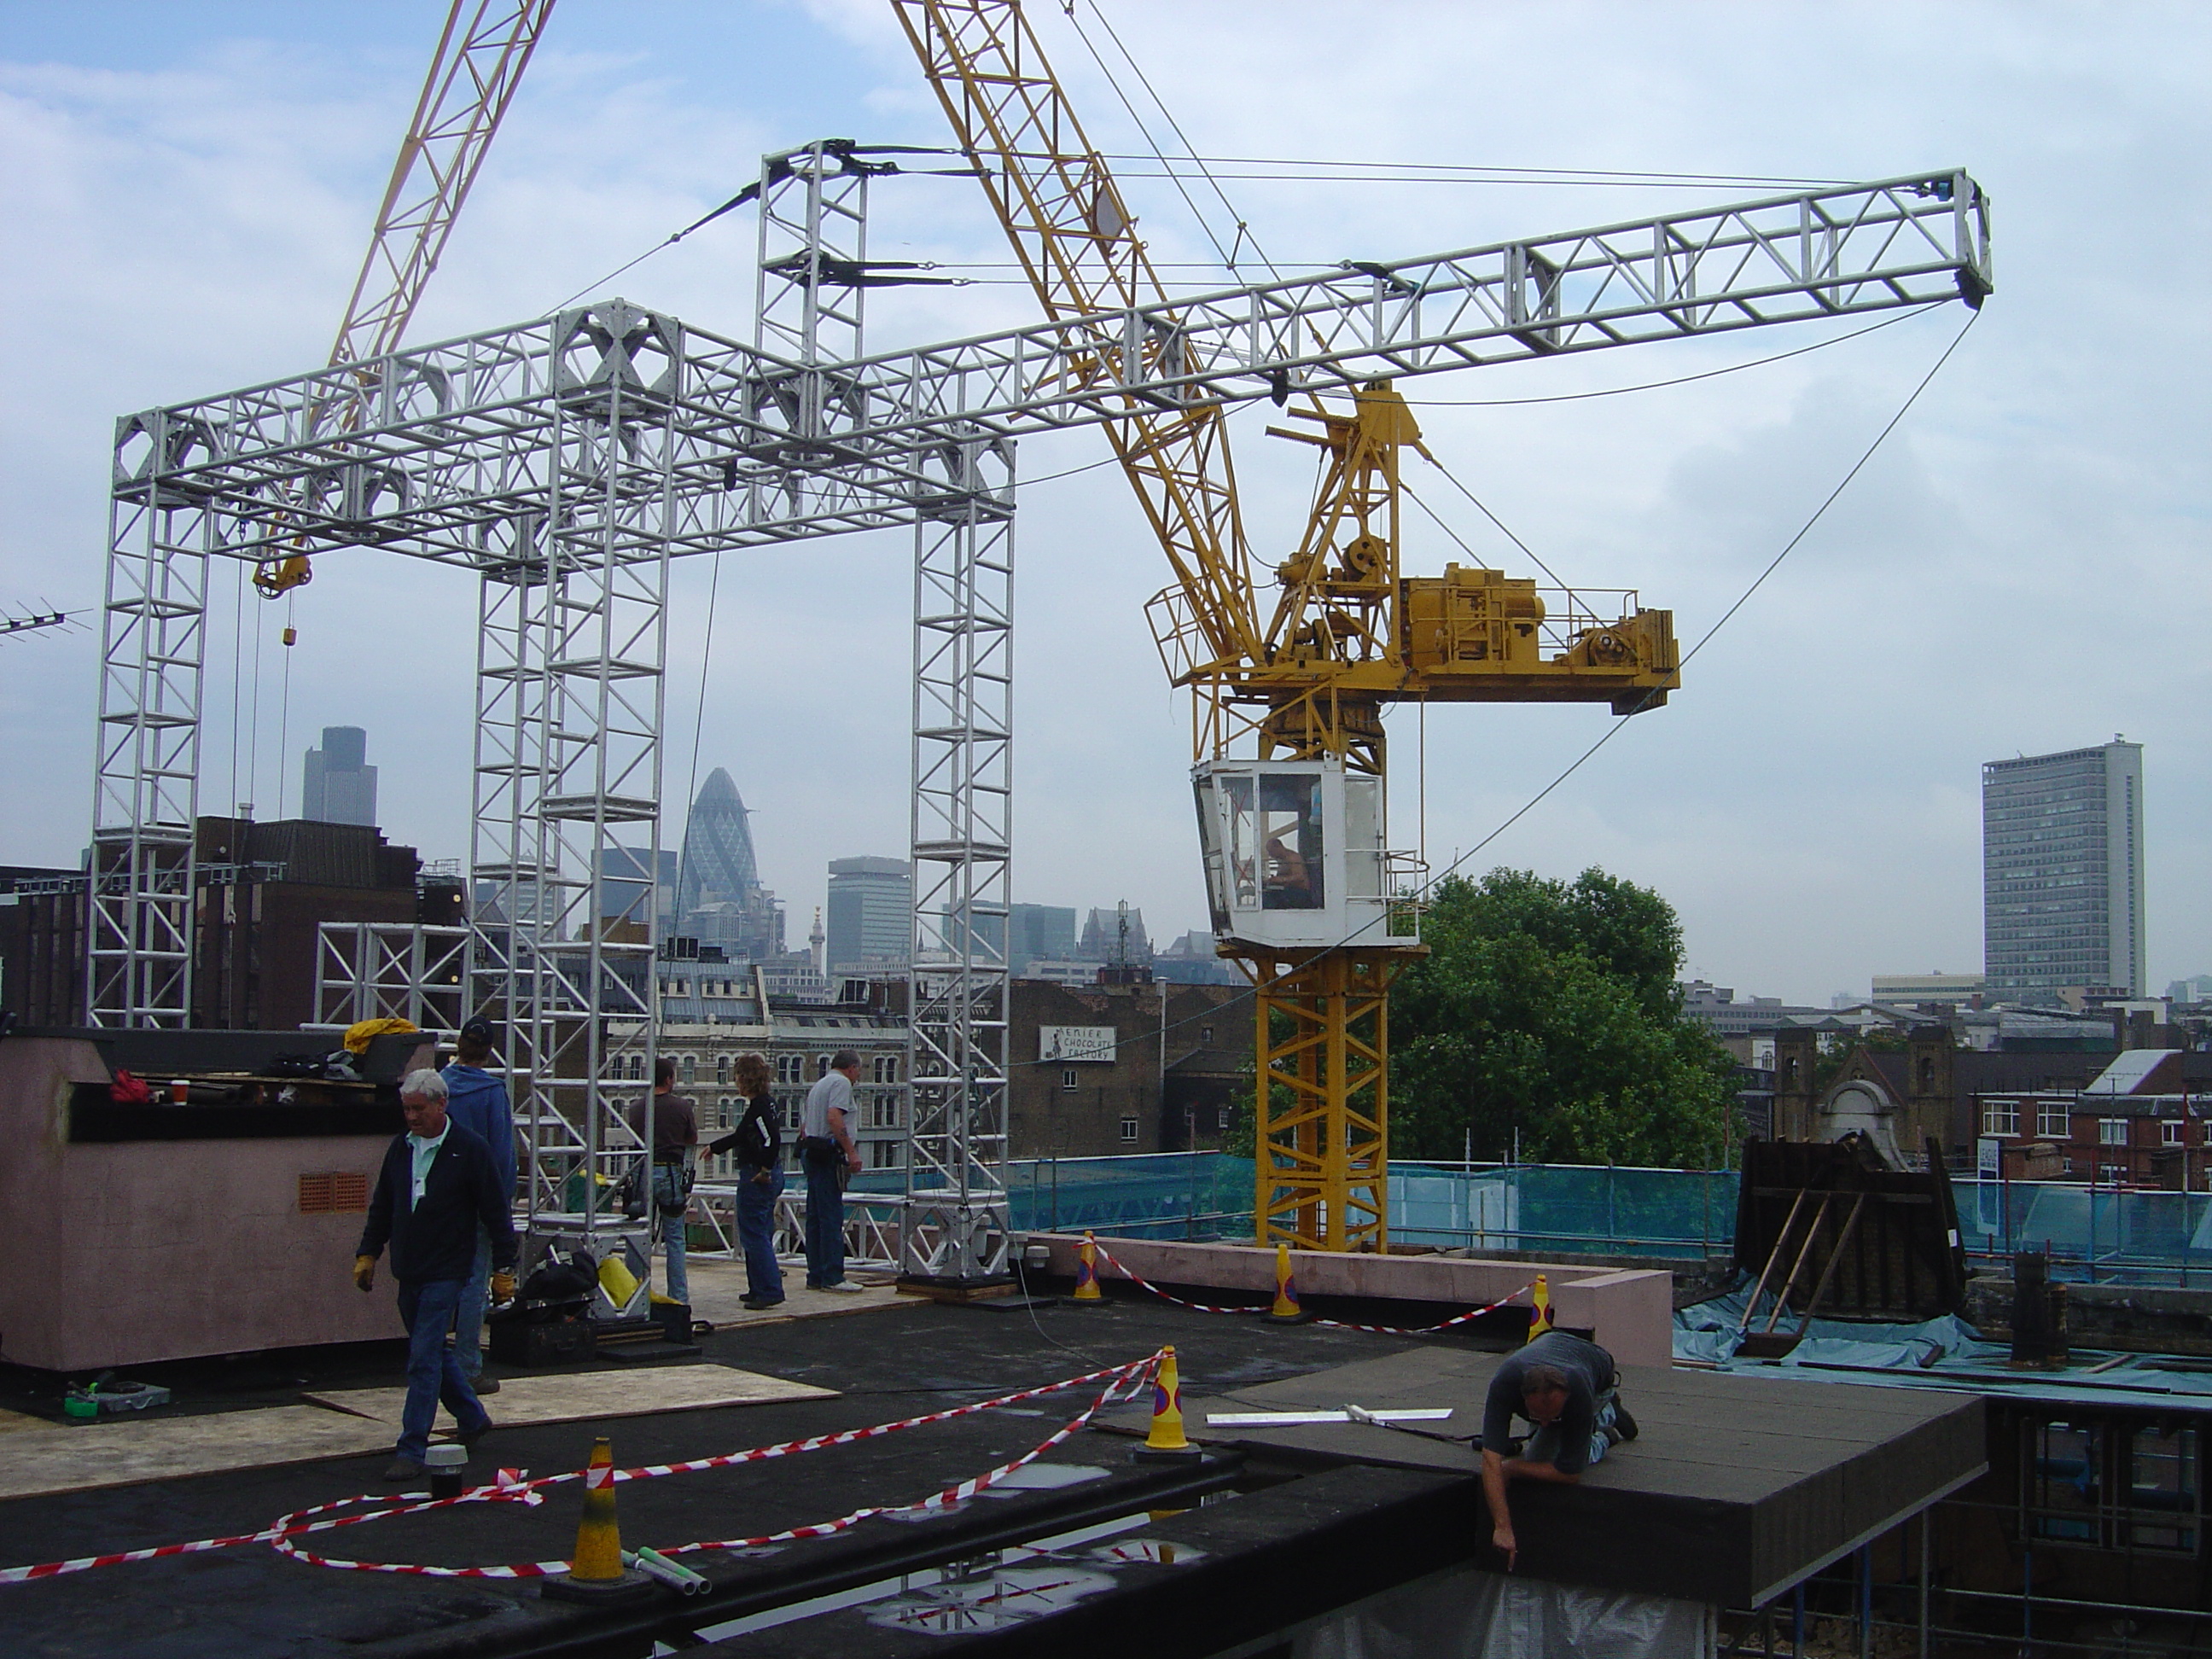 Truss, Stunt Rig designed for Breaking and Entering roof top jump on top of London Skyscraper near Waterloo.